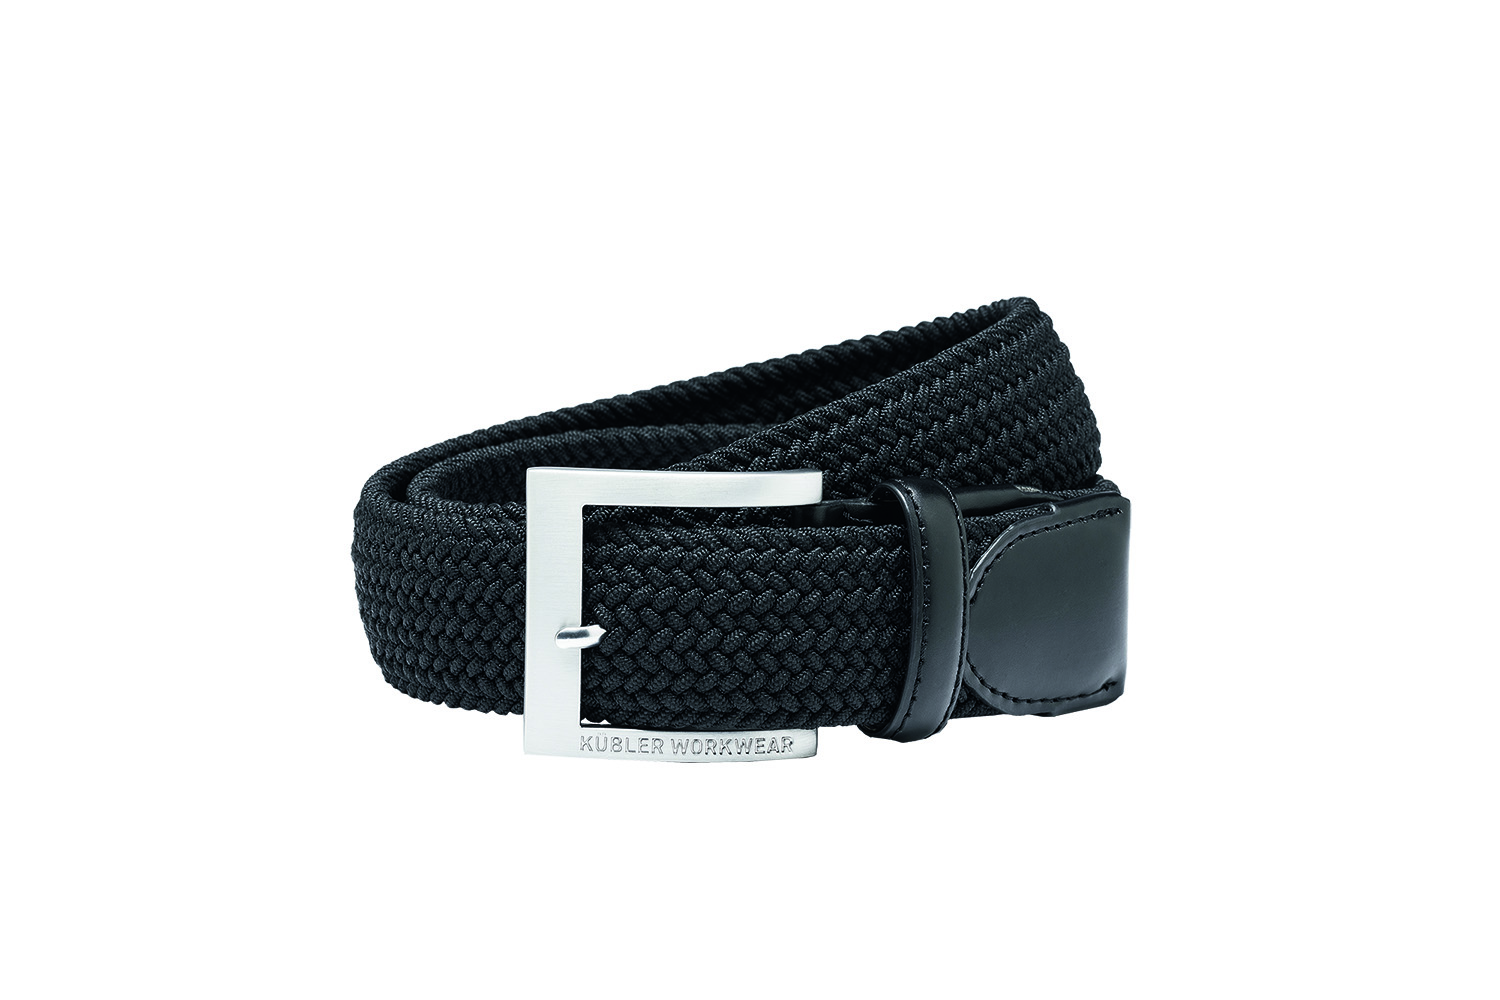 Stretchbelt with pin buckle